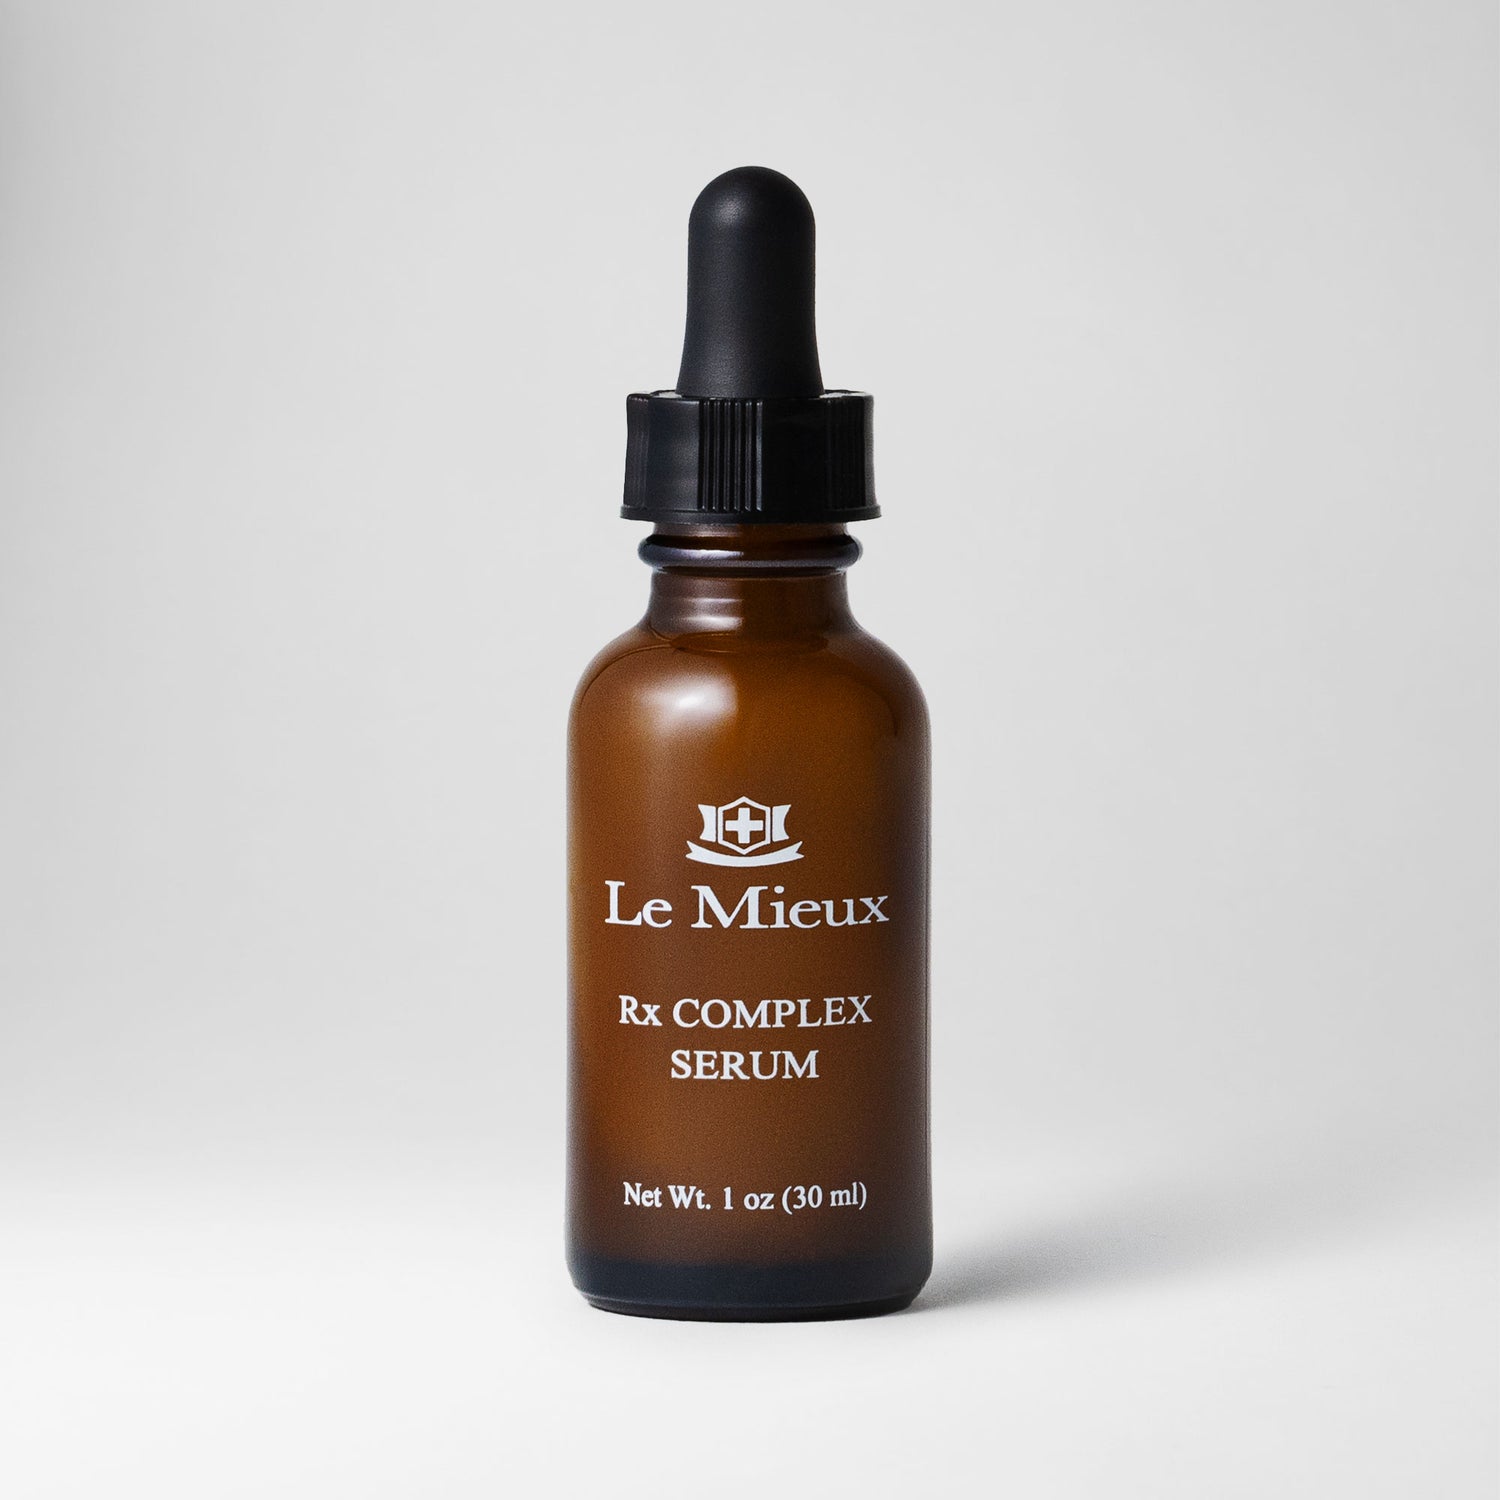  RX COMPLEX SERUM from Le Mieux Skincare - featured